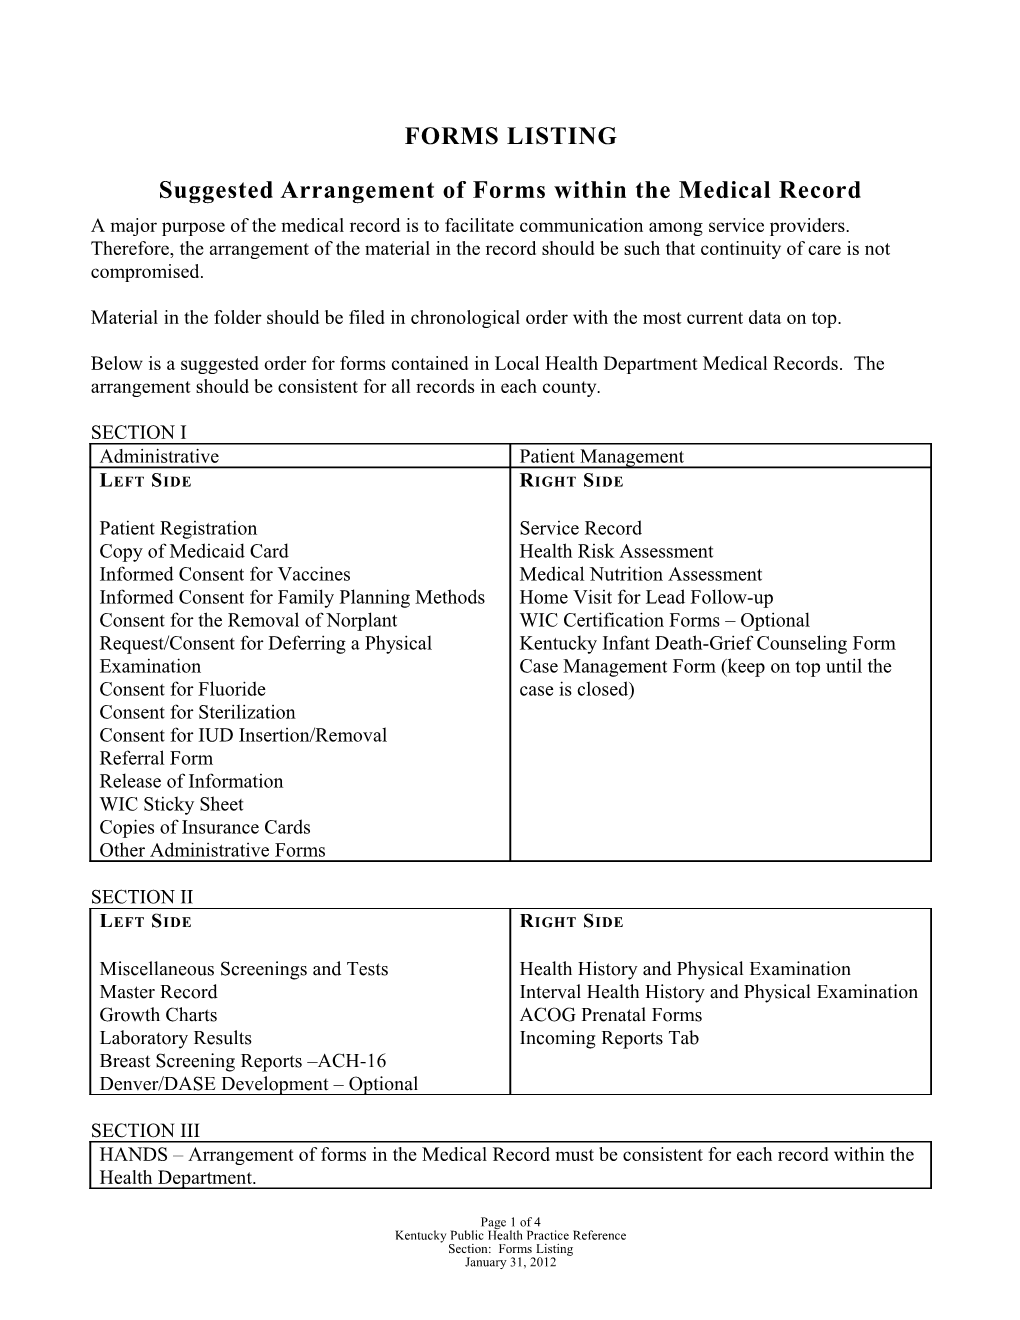 Suggested Arrangement of Forms Within the Medical Record